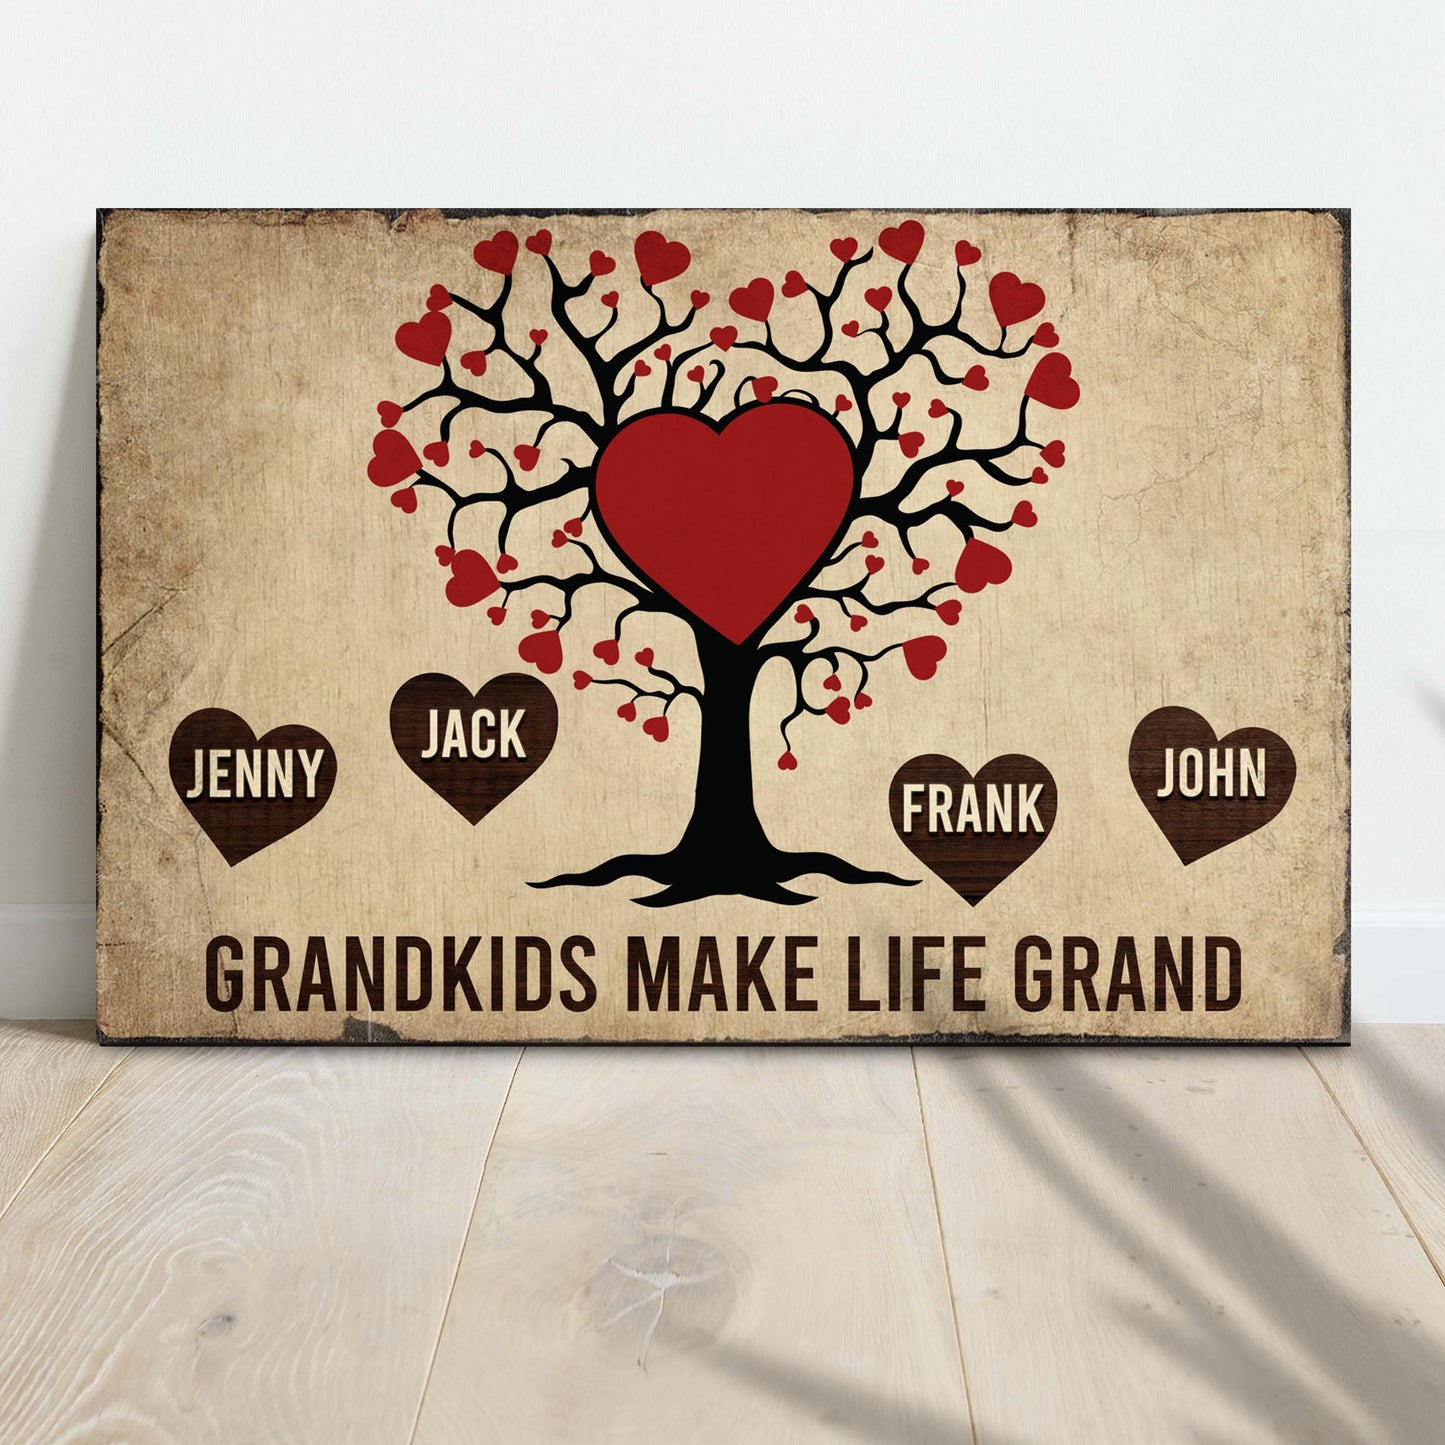 Grandkids Make Life Grand Sign - Image by Tailored Canvases